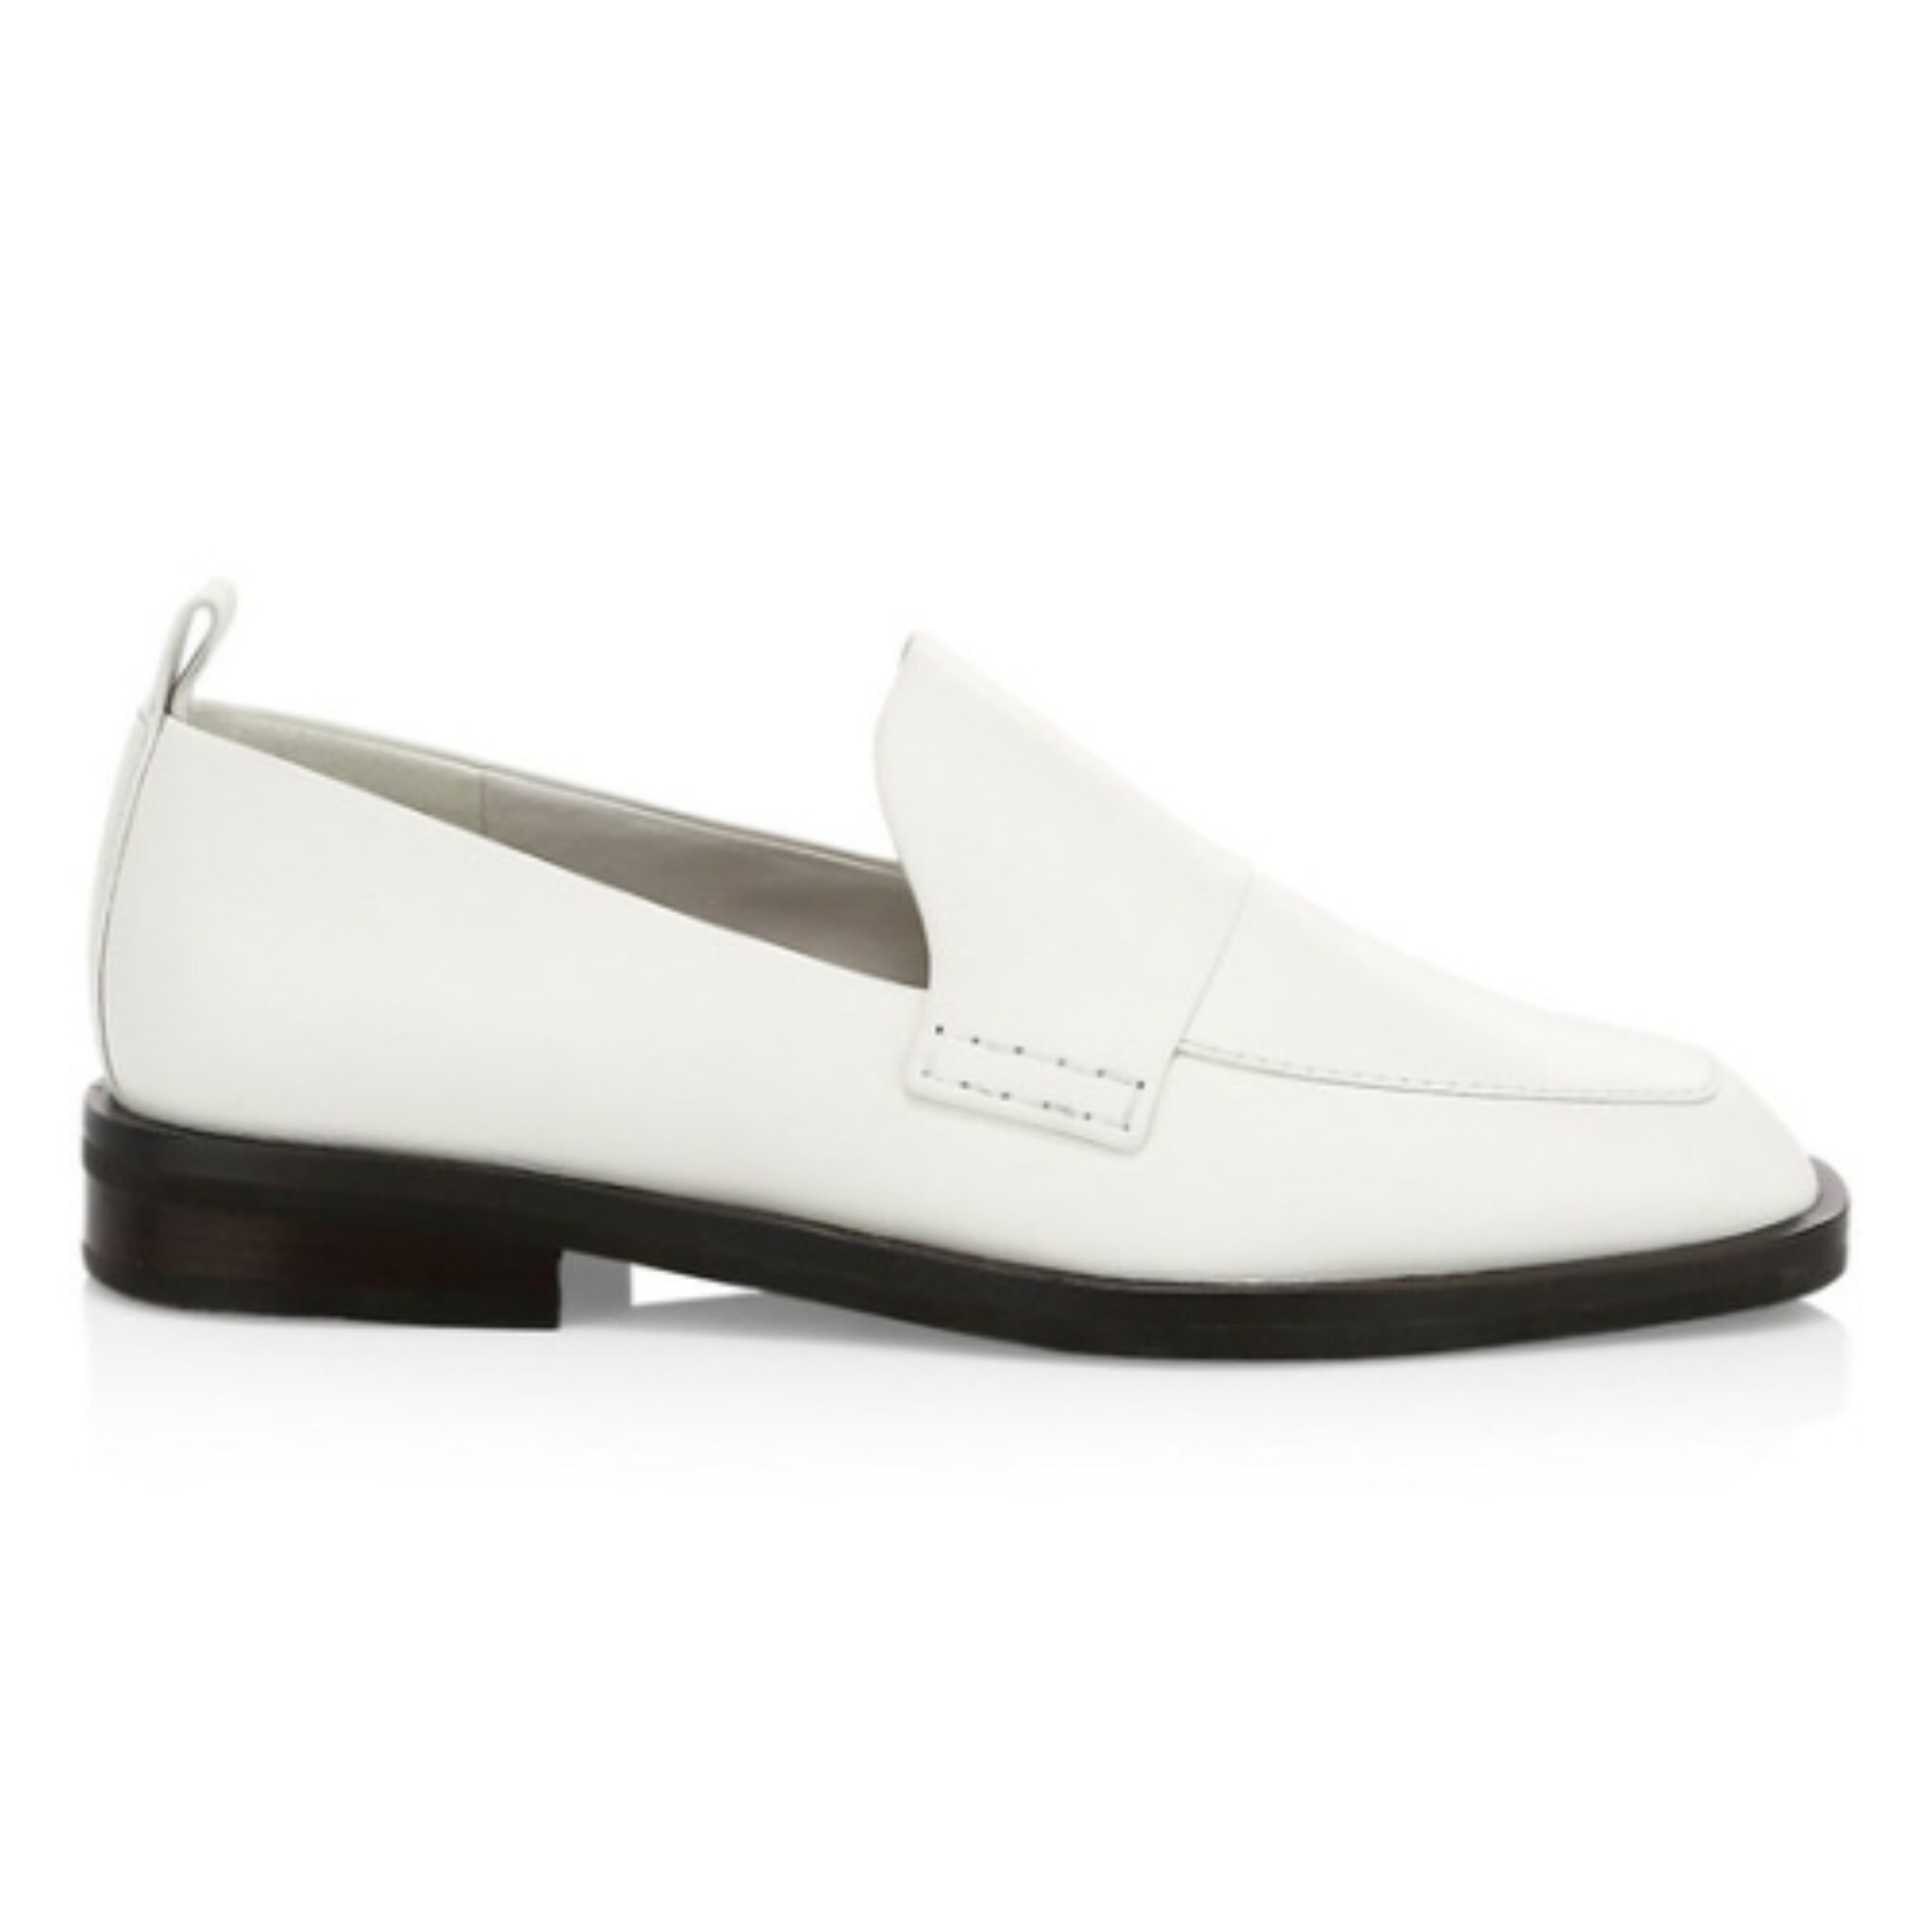 White oxfords to wear with leather leggings.